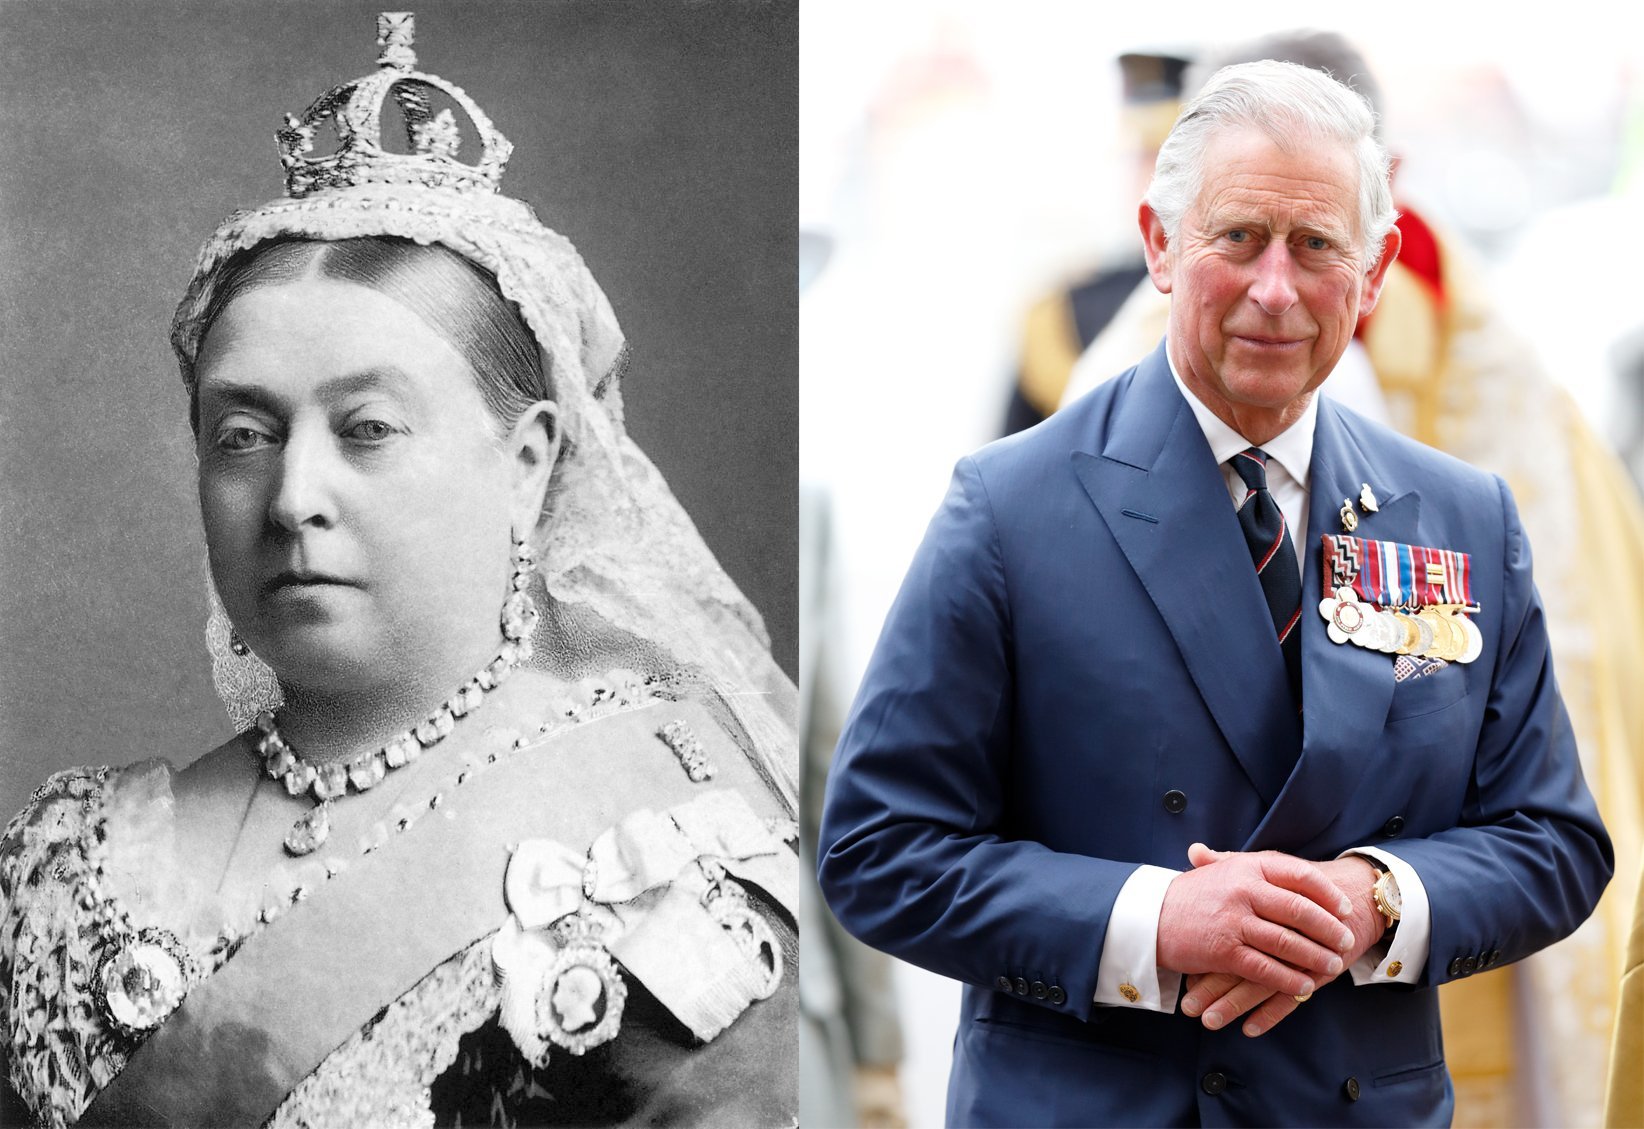 Queen Victoria and Prince Charles. I Image: Wikimedia Commons/ Getty Images.